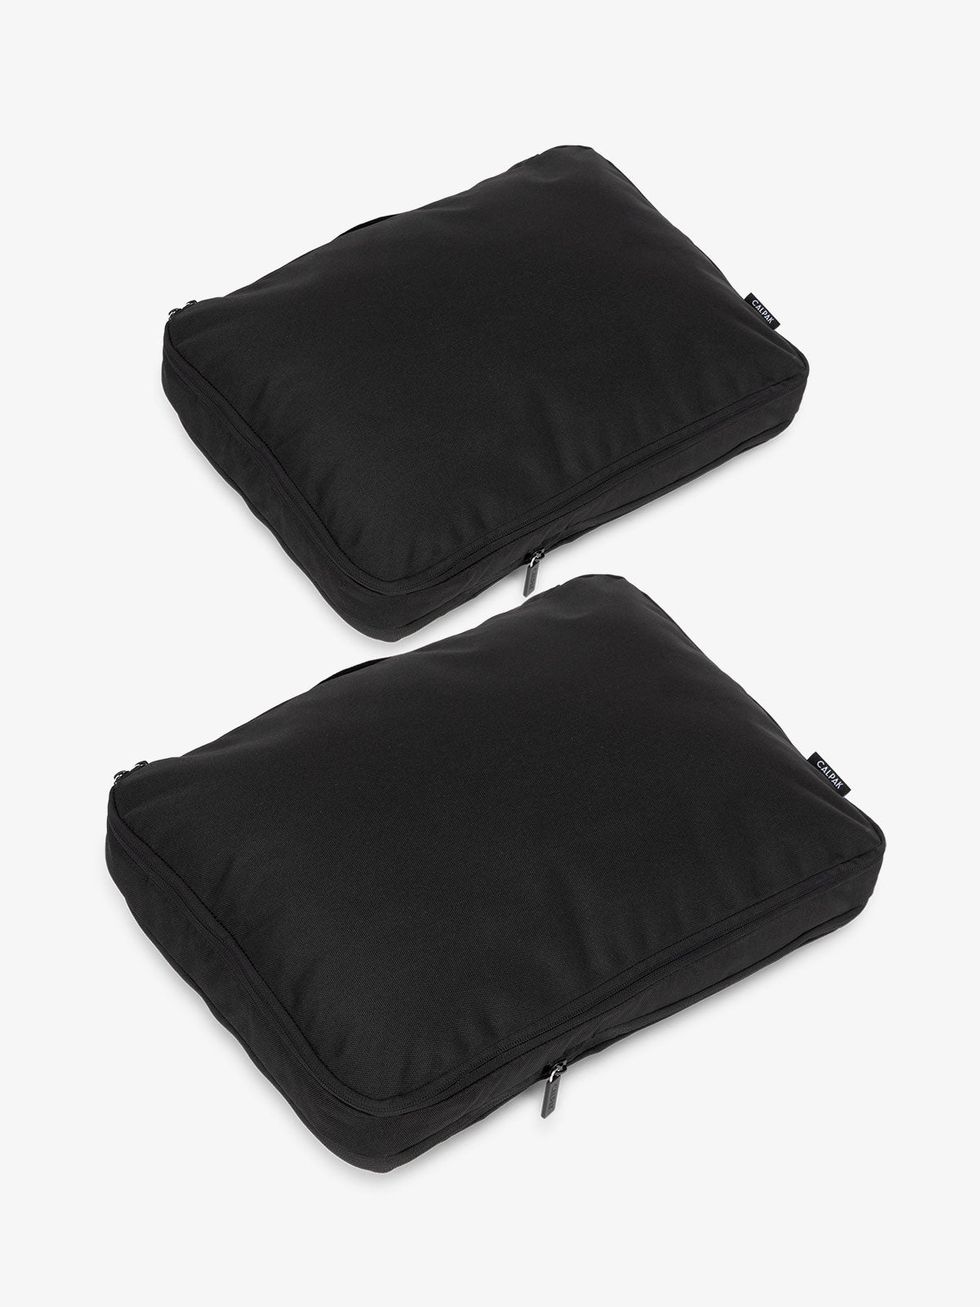 Large Compression Packing Cubes